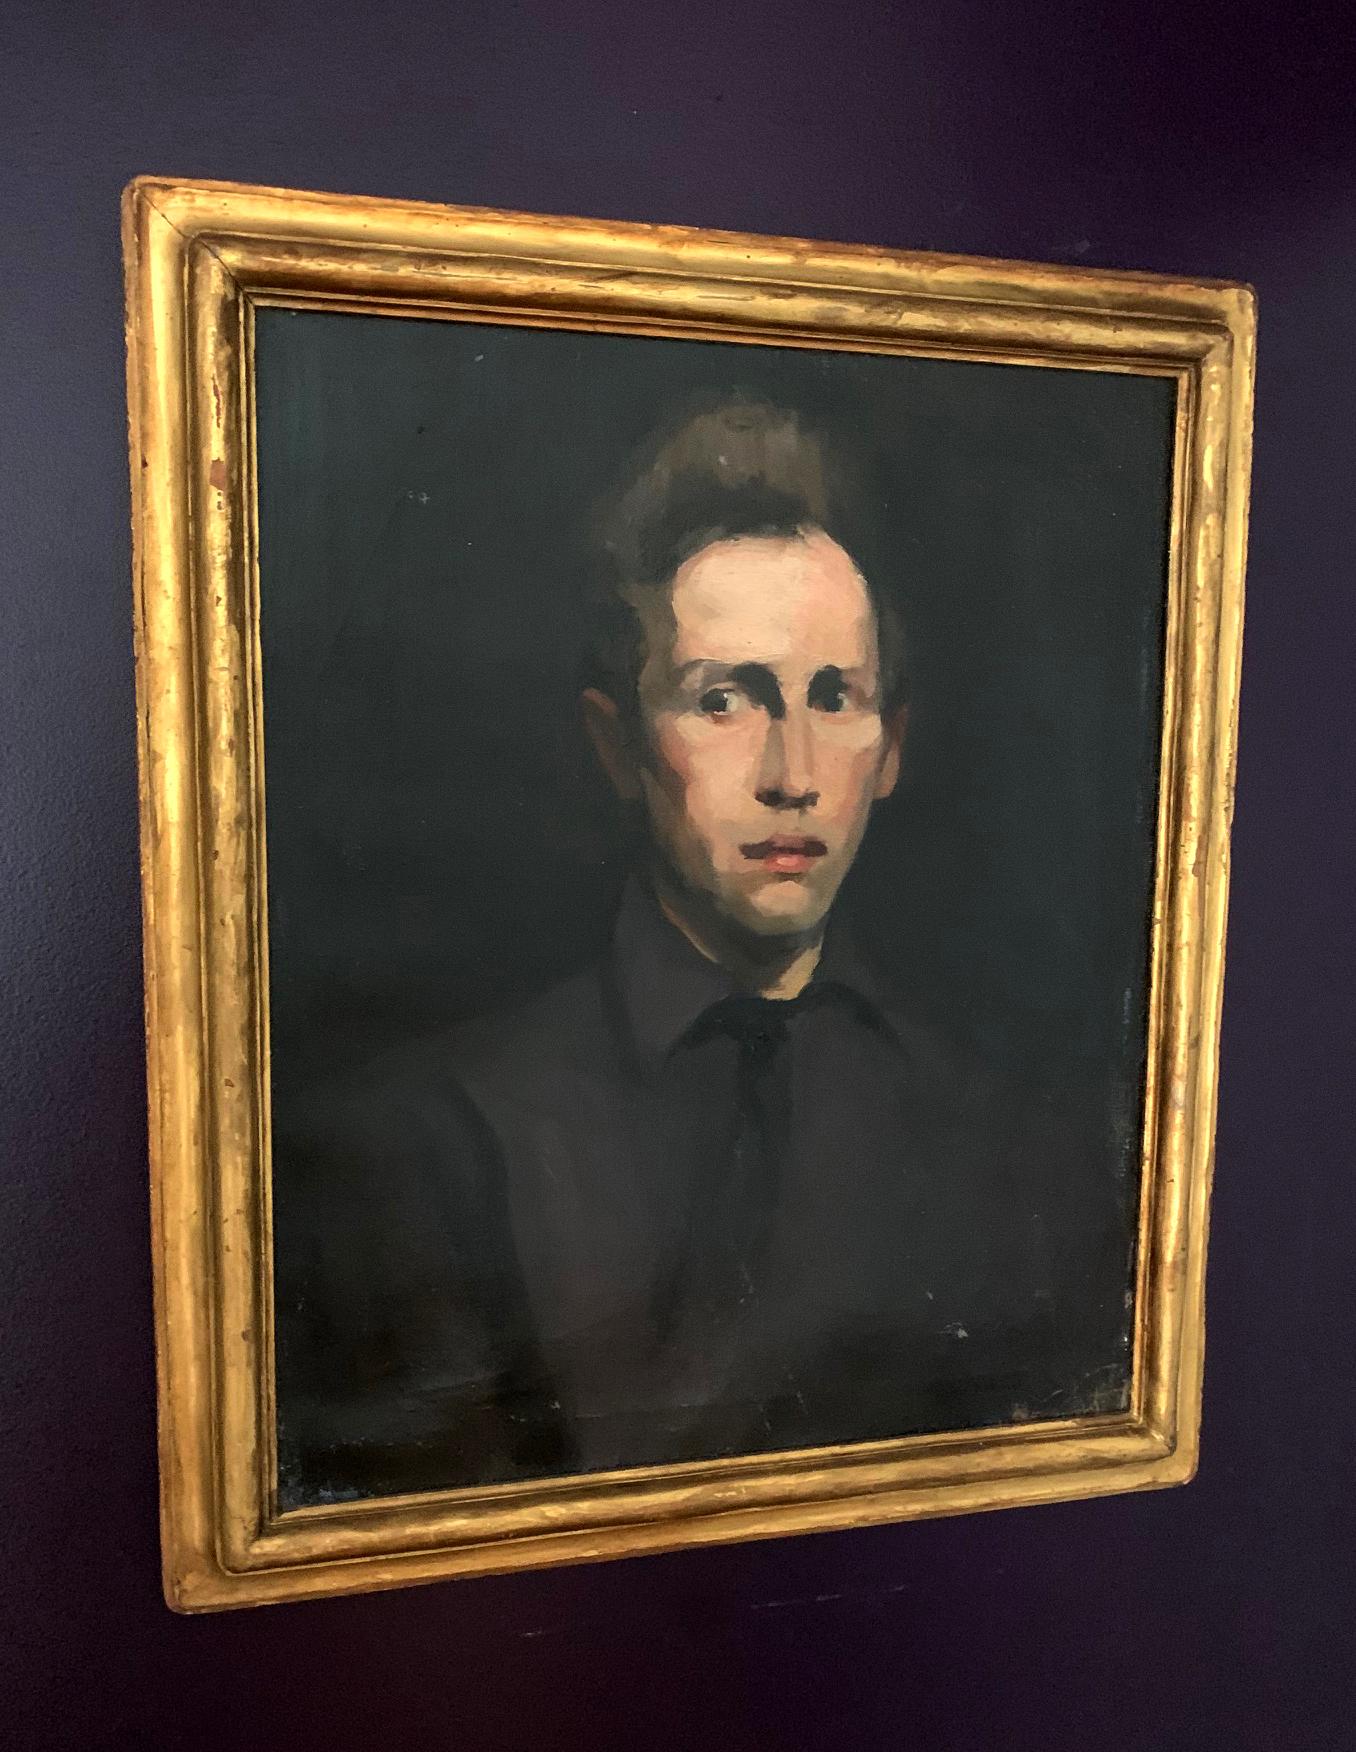 An oil painting depicting an unidentified young man by George Wesley Bellows (1882-1925), a member of American Ashcan School in the circle of Robert Henri. This portrait is in its original condition with the period frame. Signed G.Bellows BR on